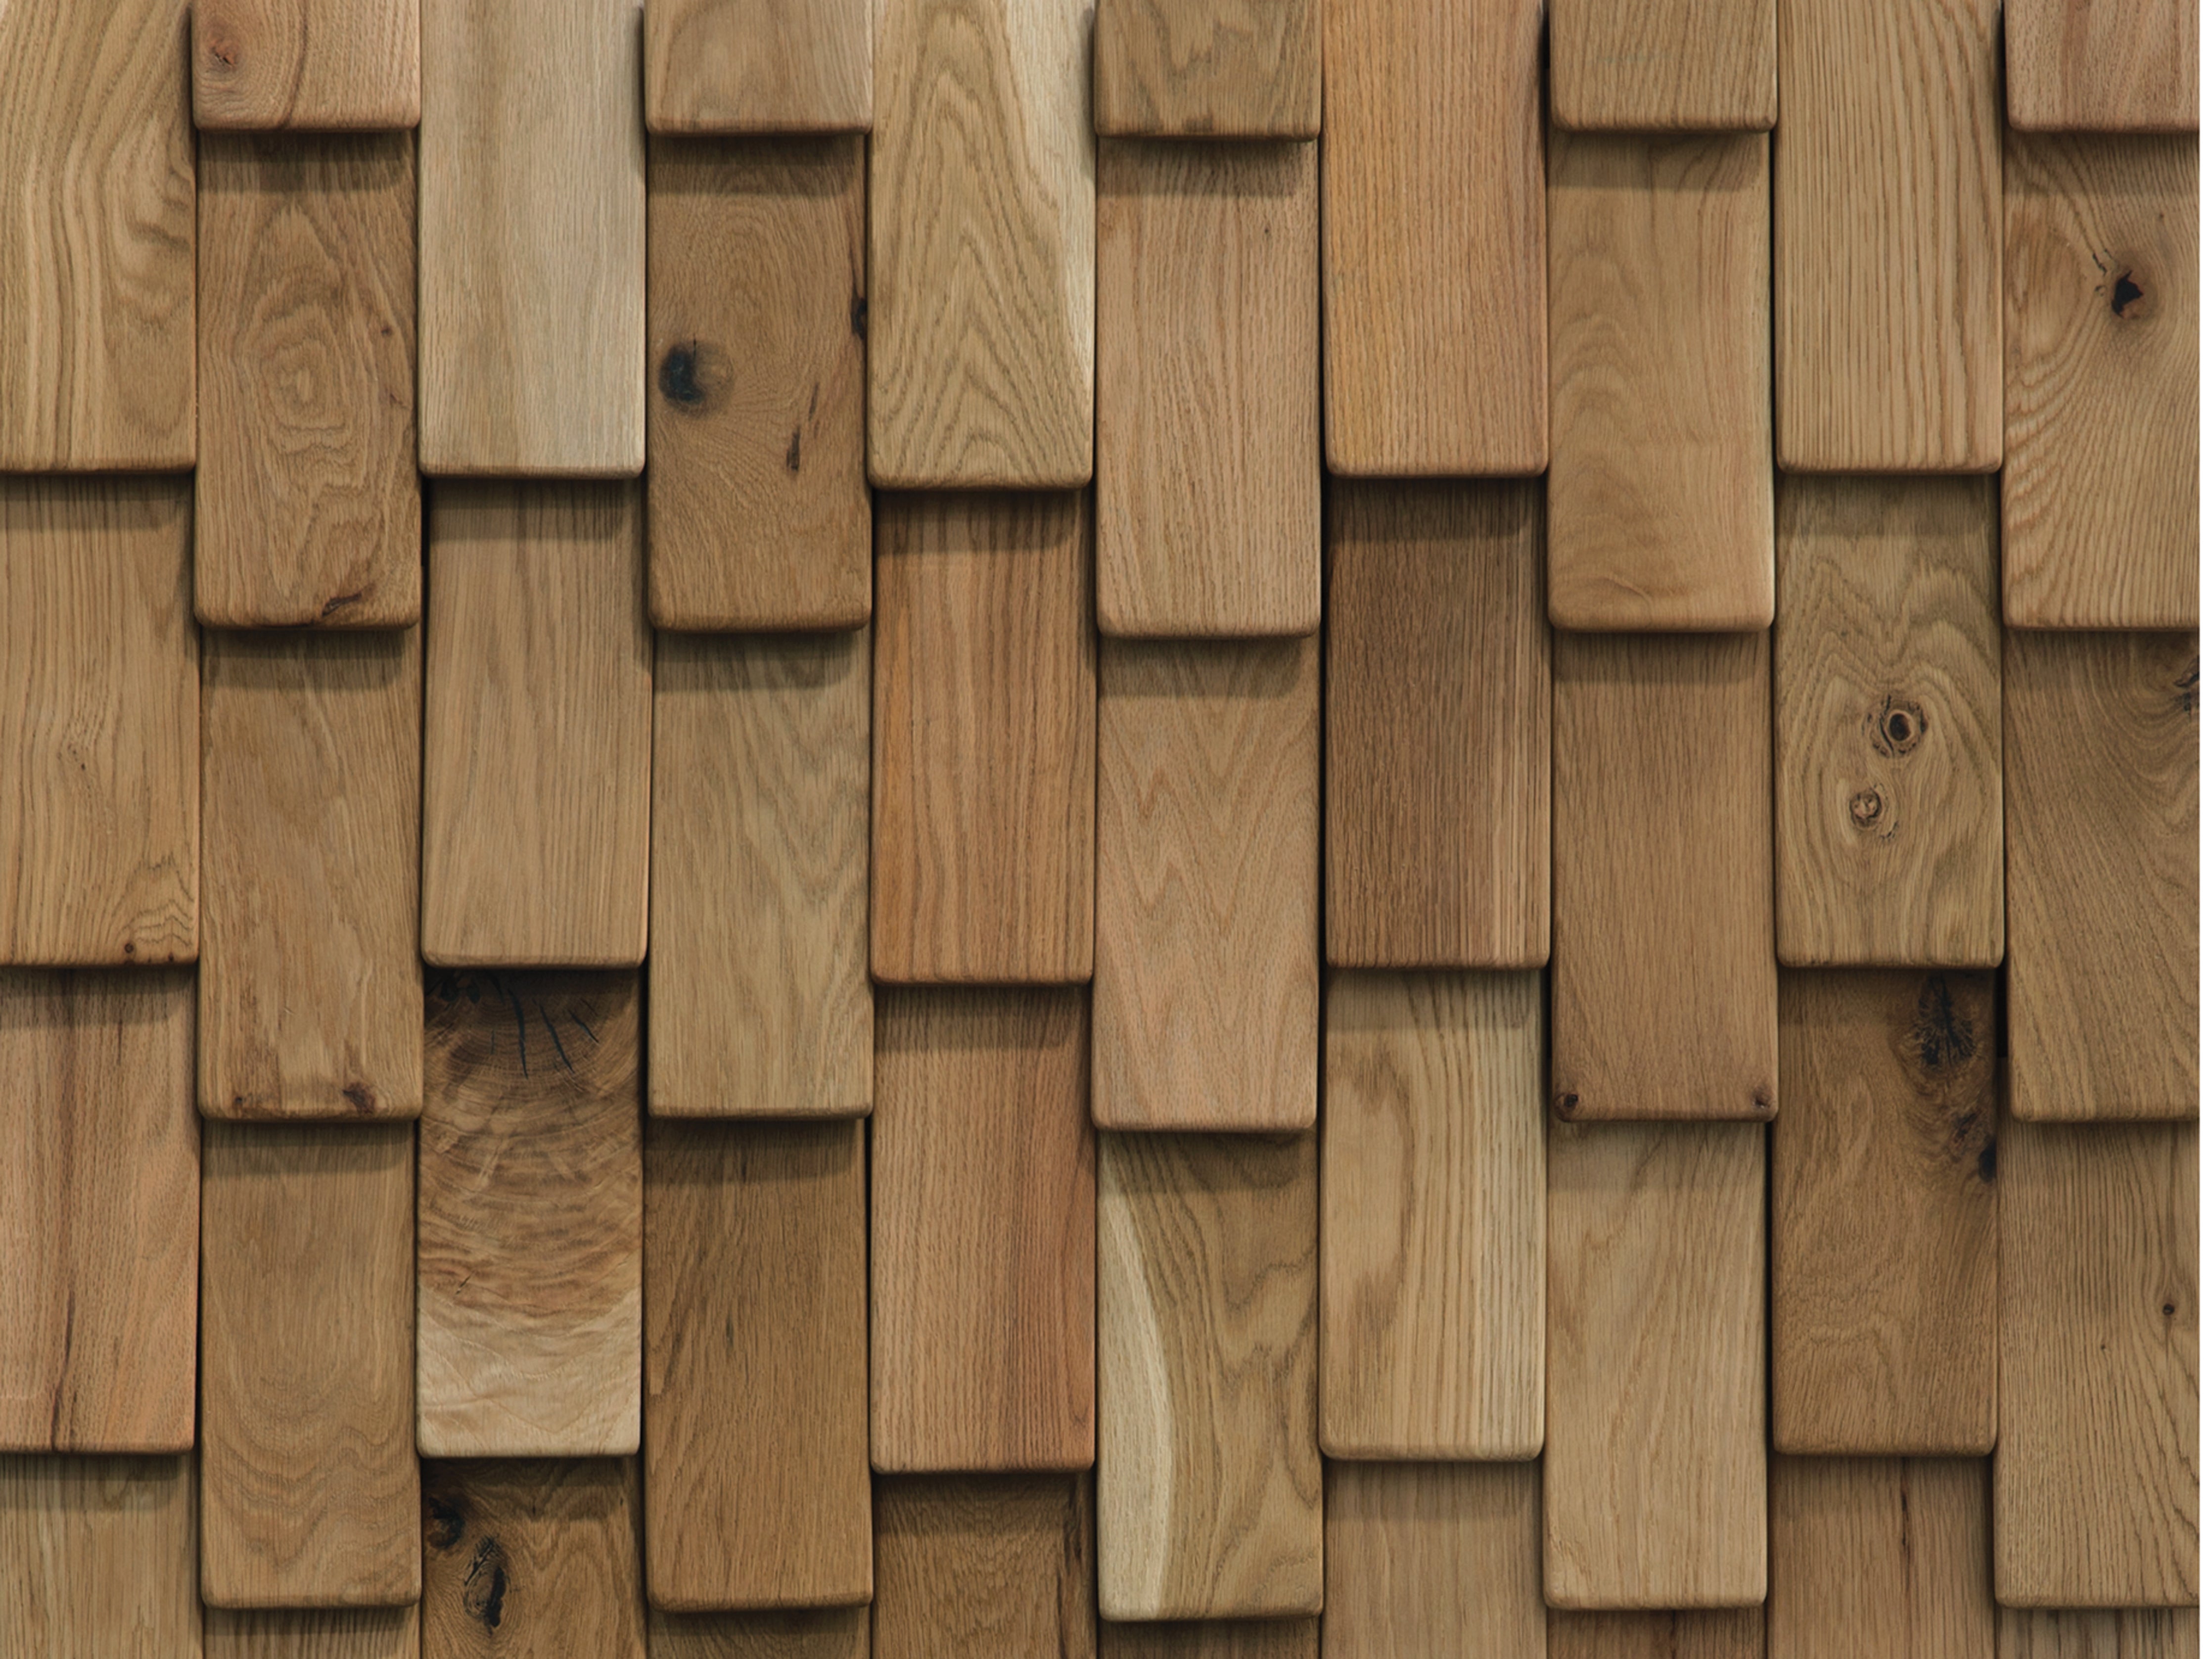 duchateau inceptiv scale reckt olde dutch oak three dimensional wall natural wood panel lacquer for interior use distributed by surface group international